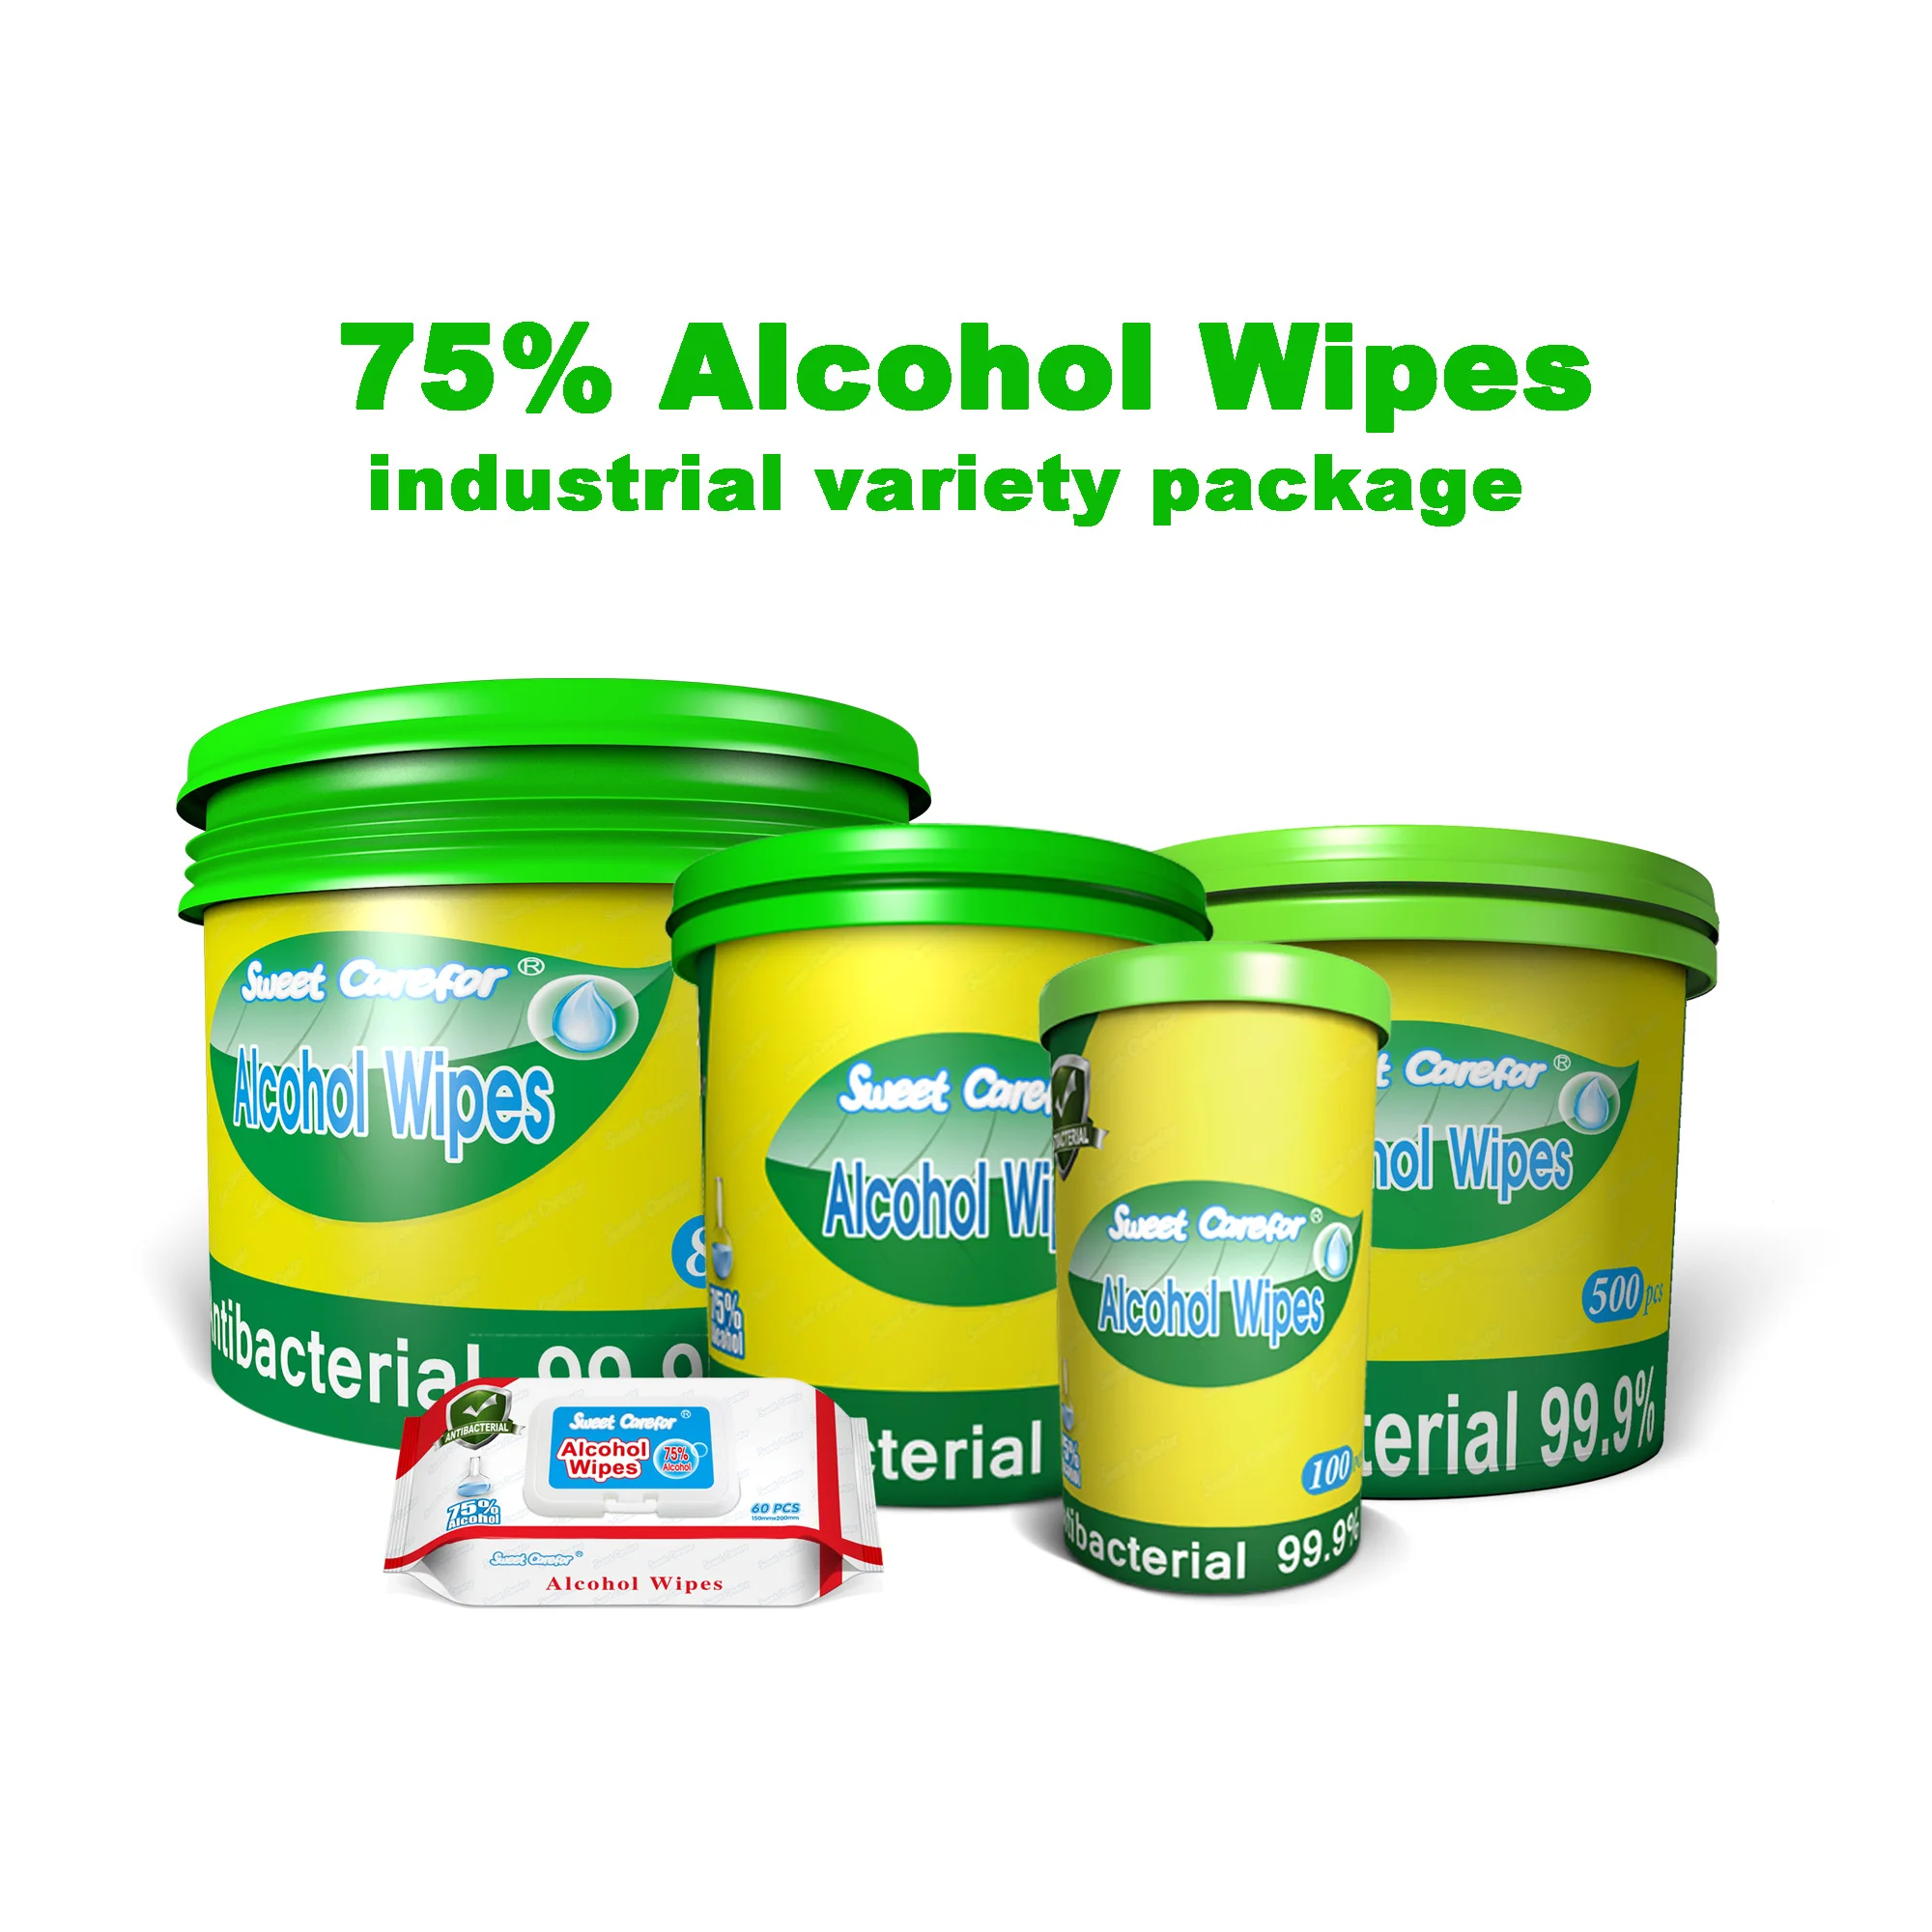 Imperial Palace Commodity (Shenzhen) Co., Ltd. - Baby Wipes, Toilet Paper